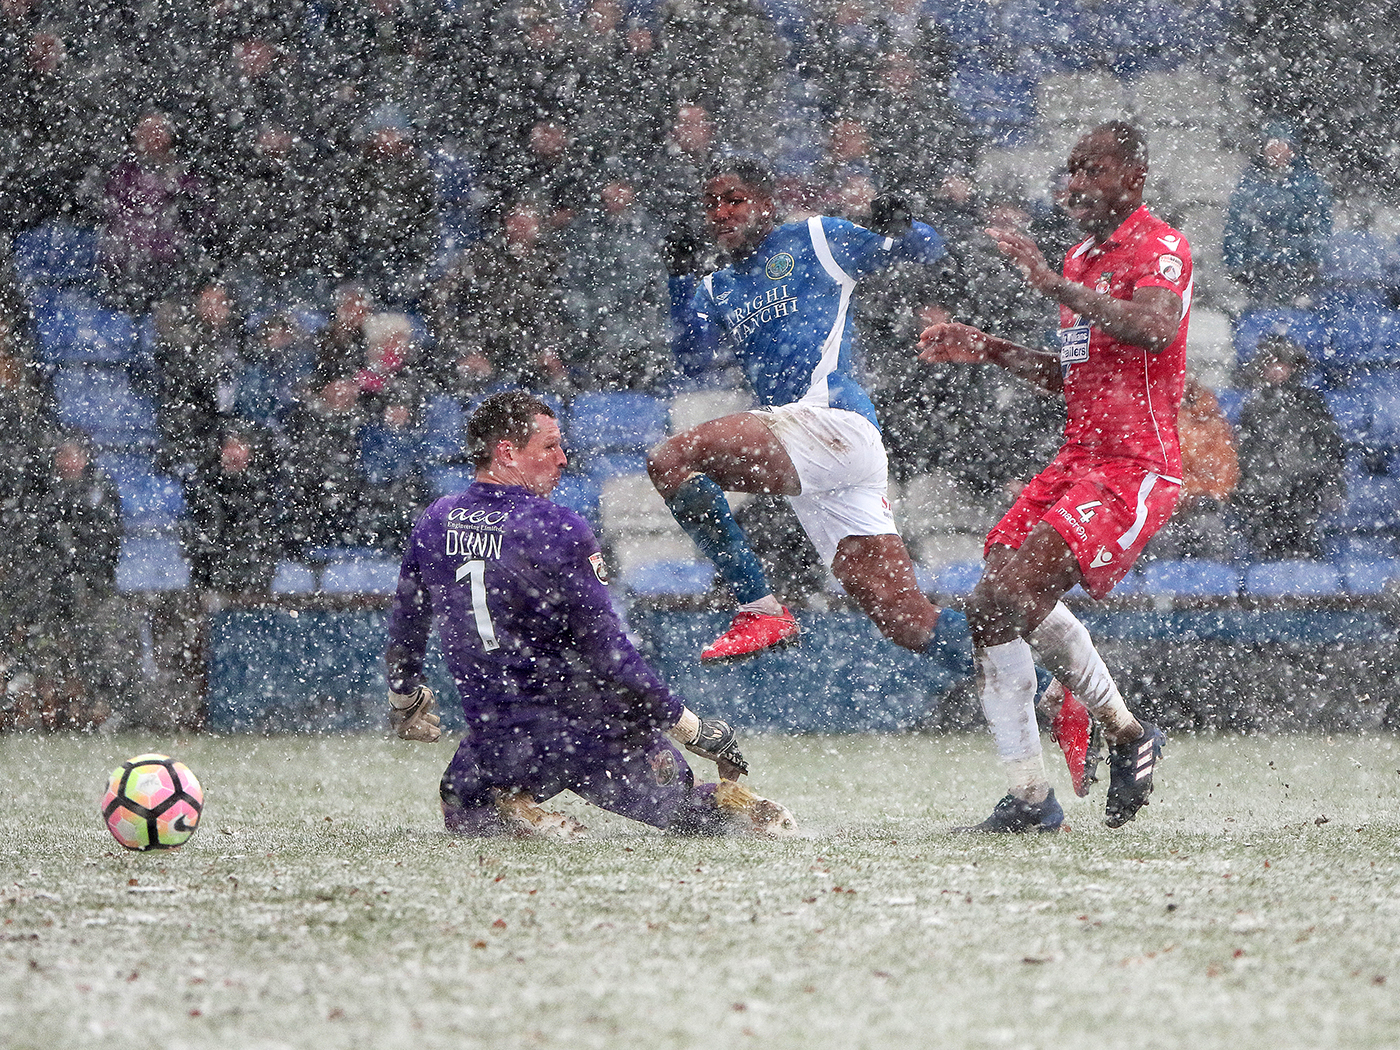 Macclesfield Town FC score in the snow  by David Tolliday